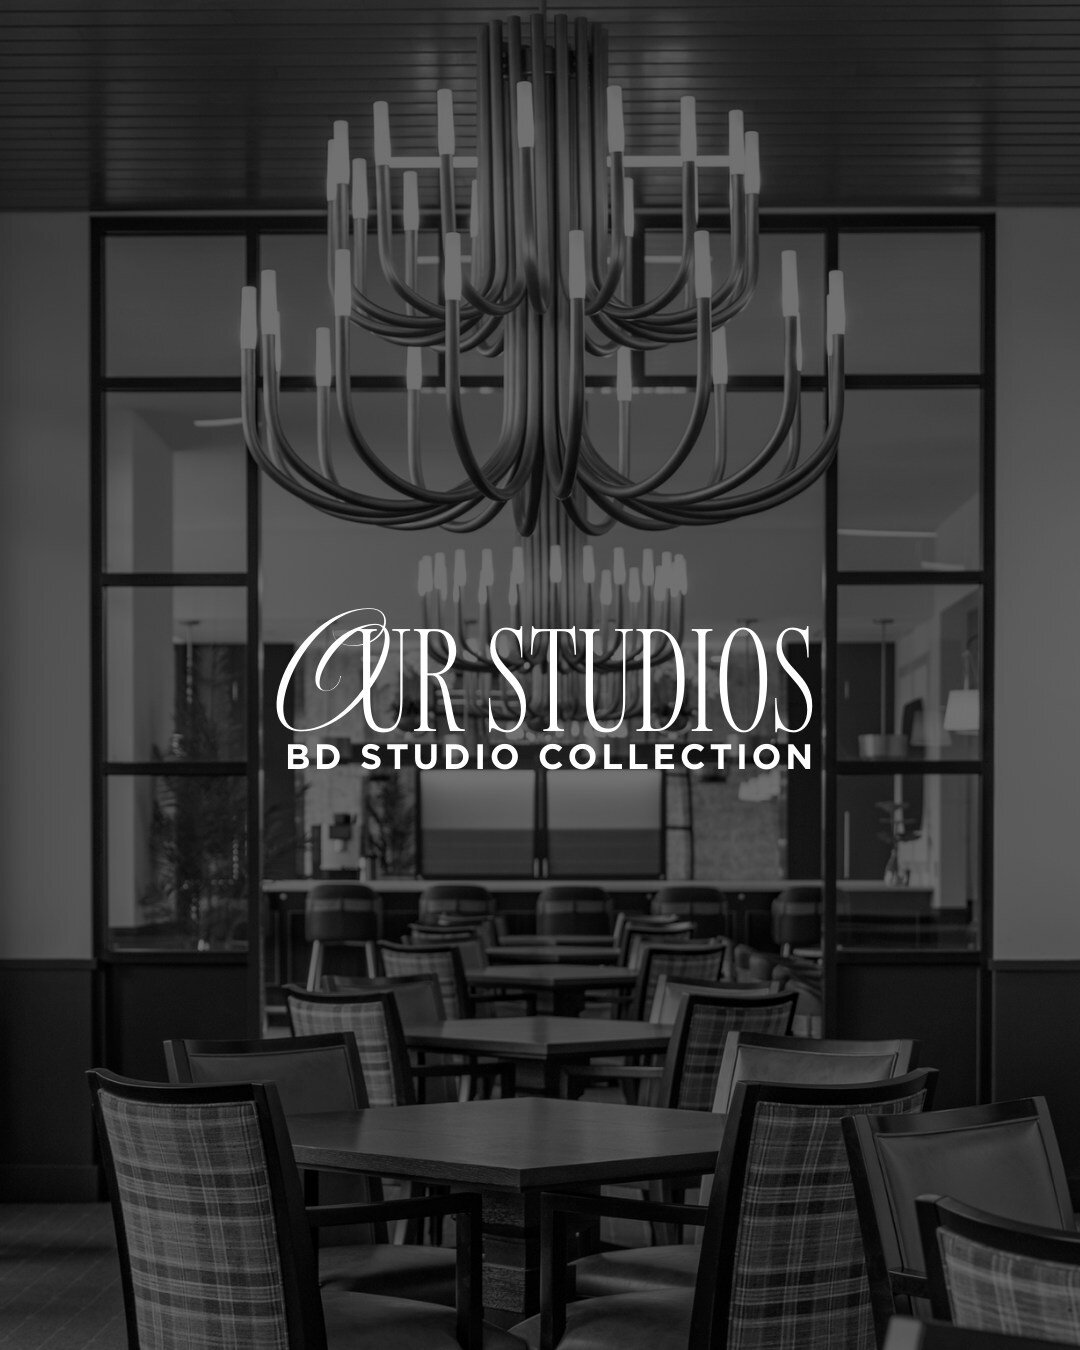 Get to know OUR STUDIOS: ⬇

BD Studio Collection is a portfolio of four interior design studios, a procurement agency, and a leadership team that manages the brands. 👏🏻 Our brands include:

Banko Design - 📍 Marietta, GA 
A turnkey interior design 